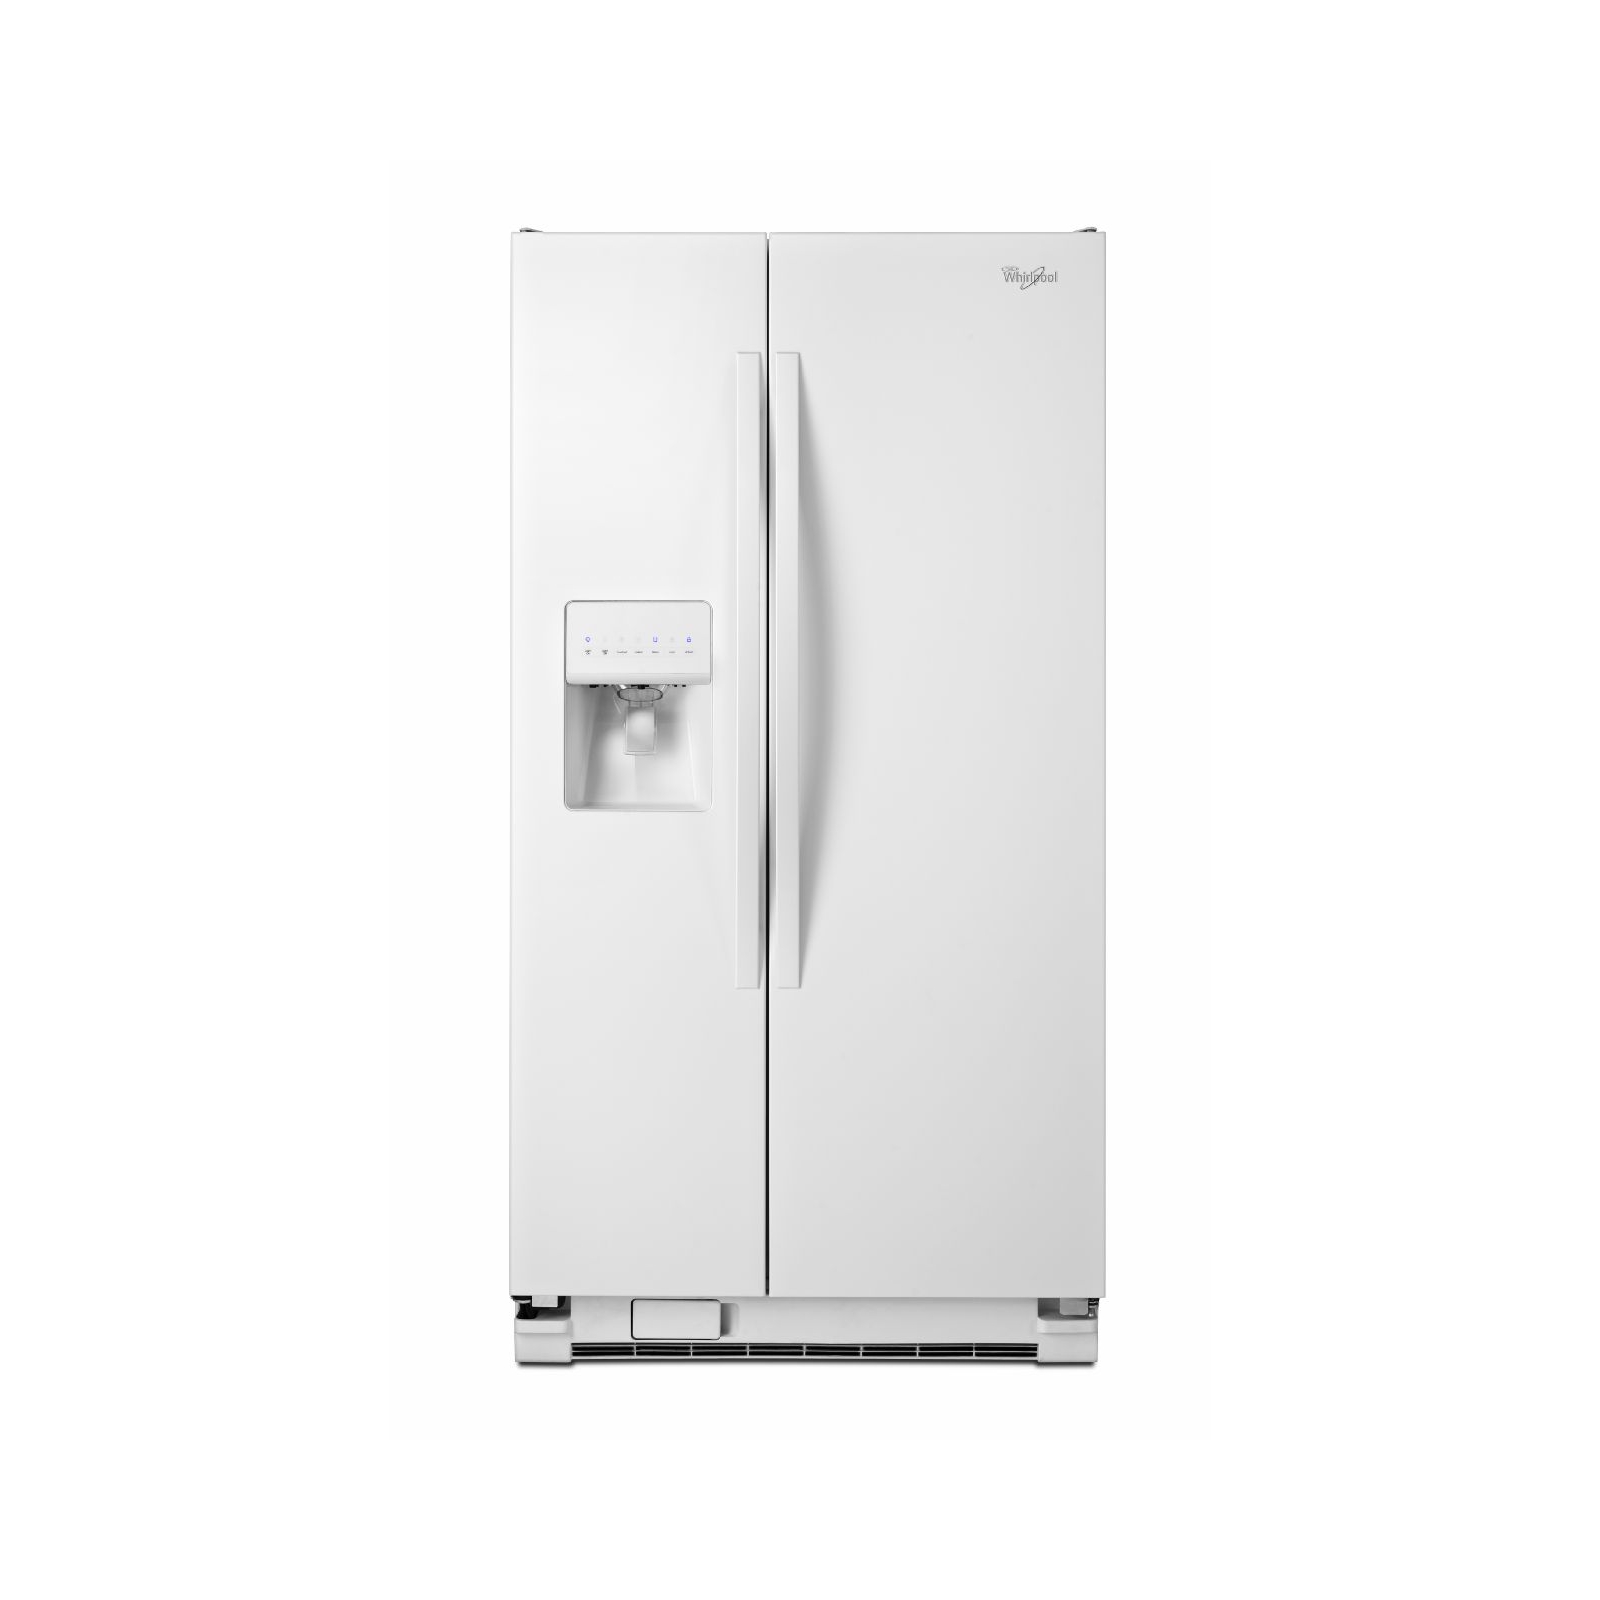 0883049244600 - 24.9 CU. FT. SIDE-BY-SIDE REFRIGERATOR W/ ACCU-CHILL&TRADE; - WHITE